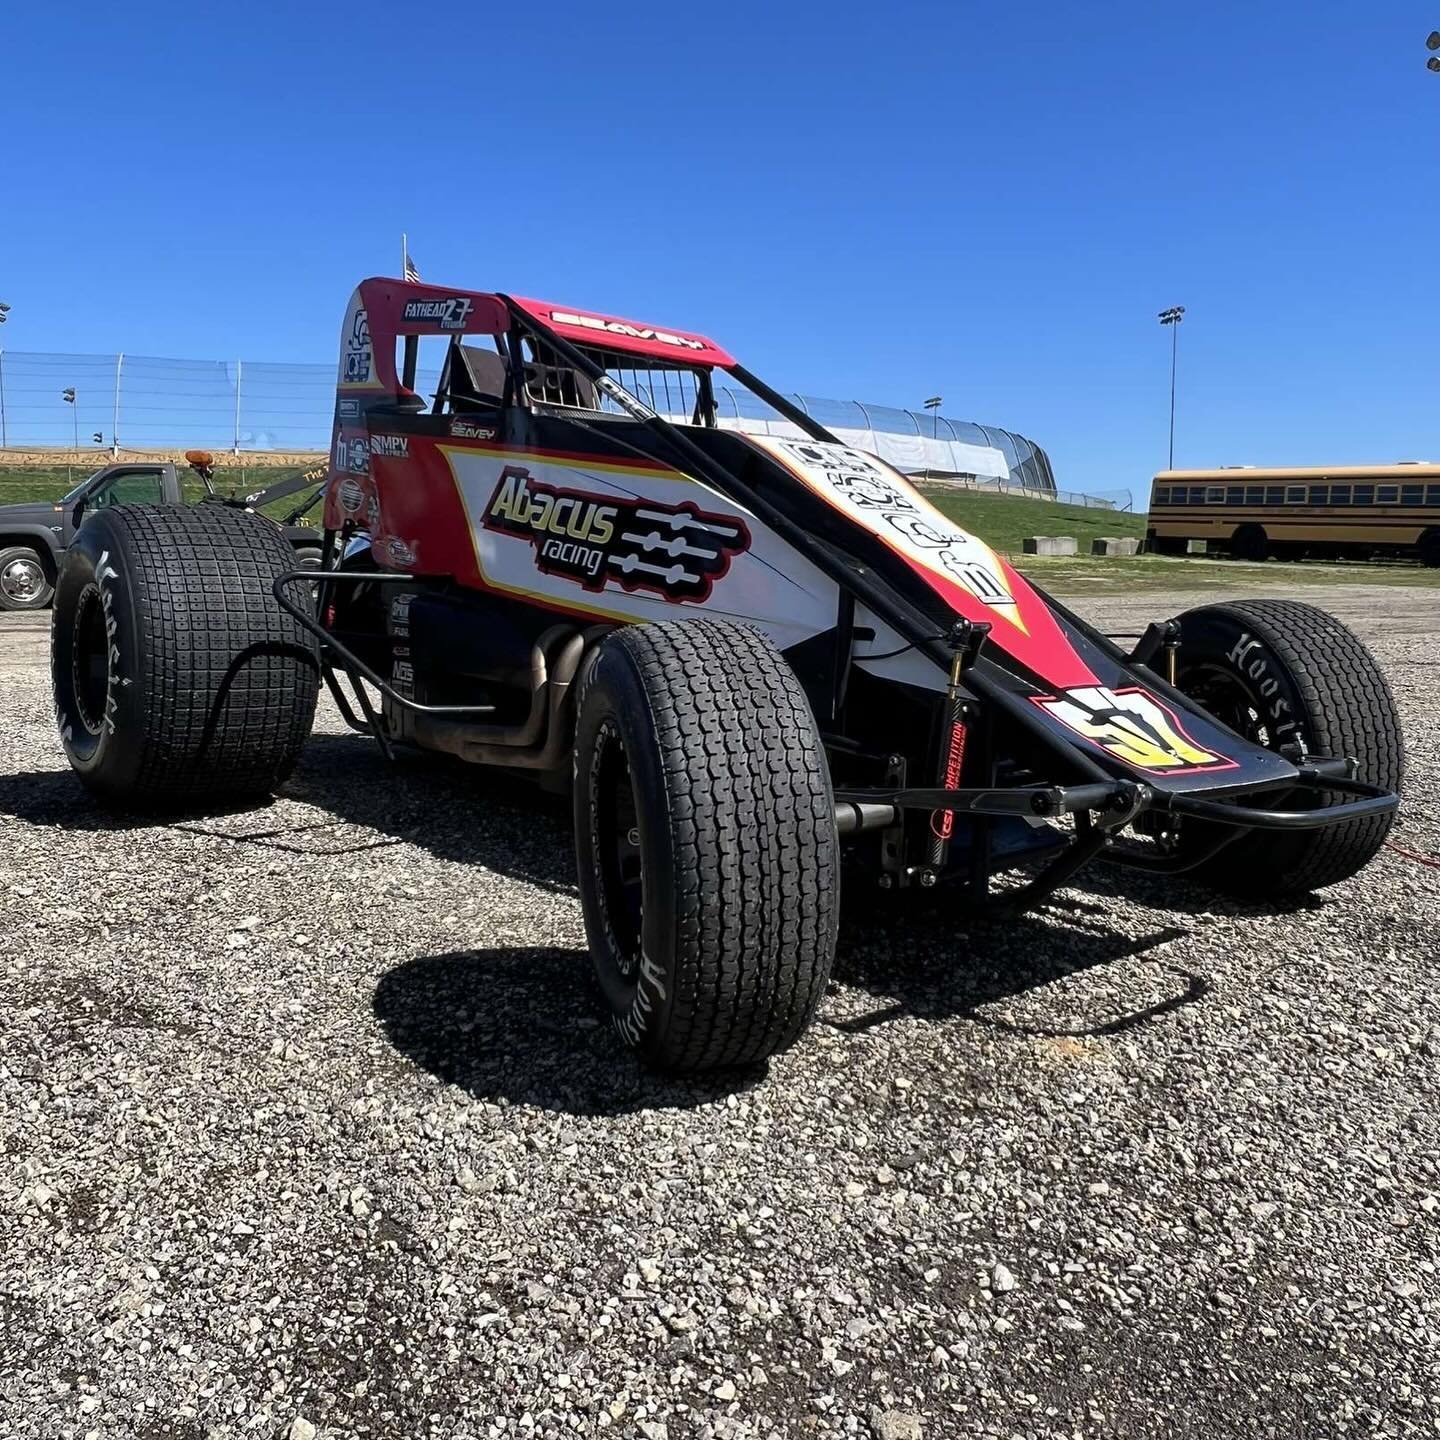 It&rsquo;s race day again with the USAC National Sprint Car Series! Tonight, we go to Lawrenceburg for the Justin Owen Memorial. Logan Seavey and #57 currently lead the points and are looking to extend the lead. Tune in on FloRacing for all the actio